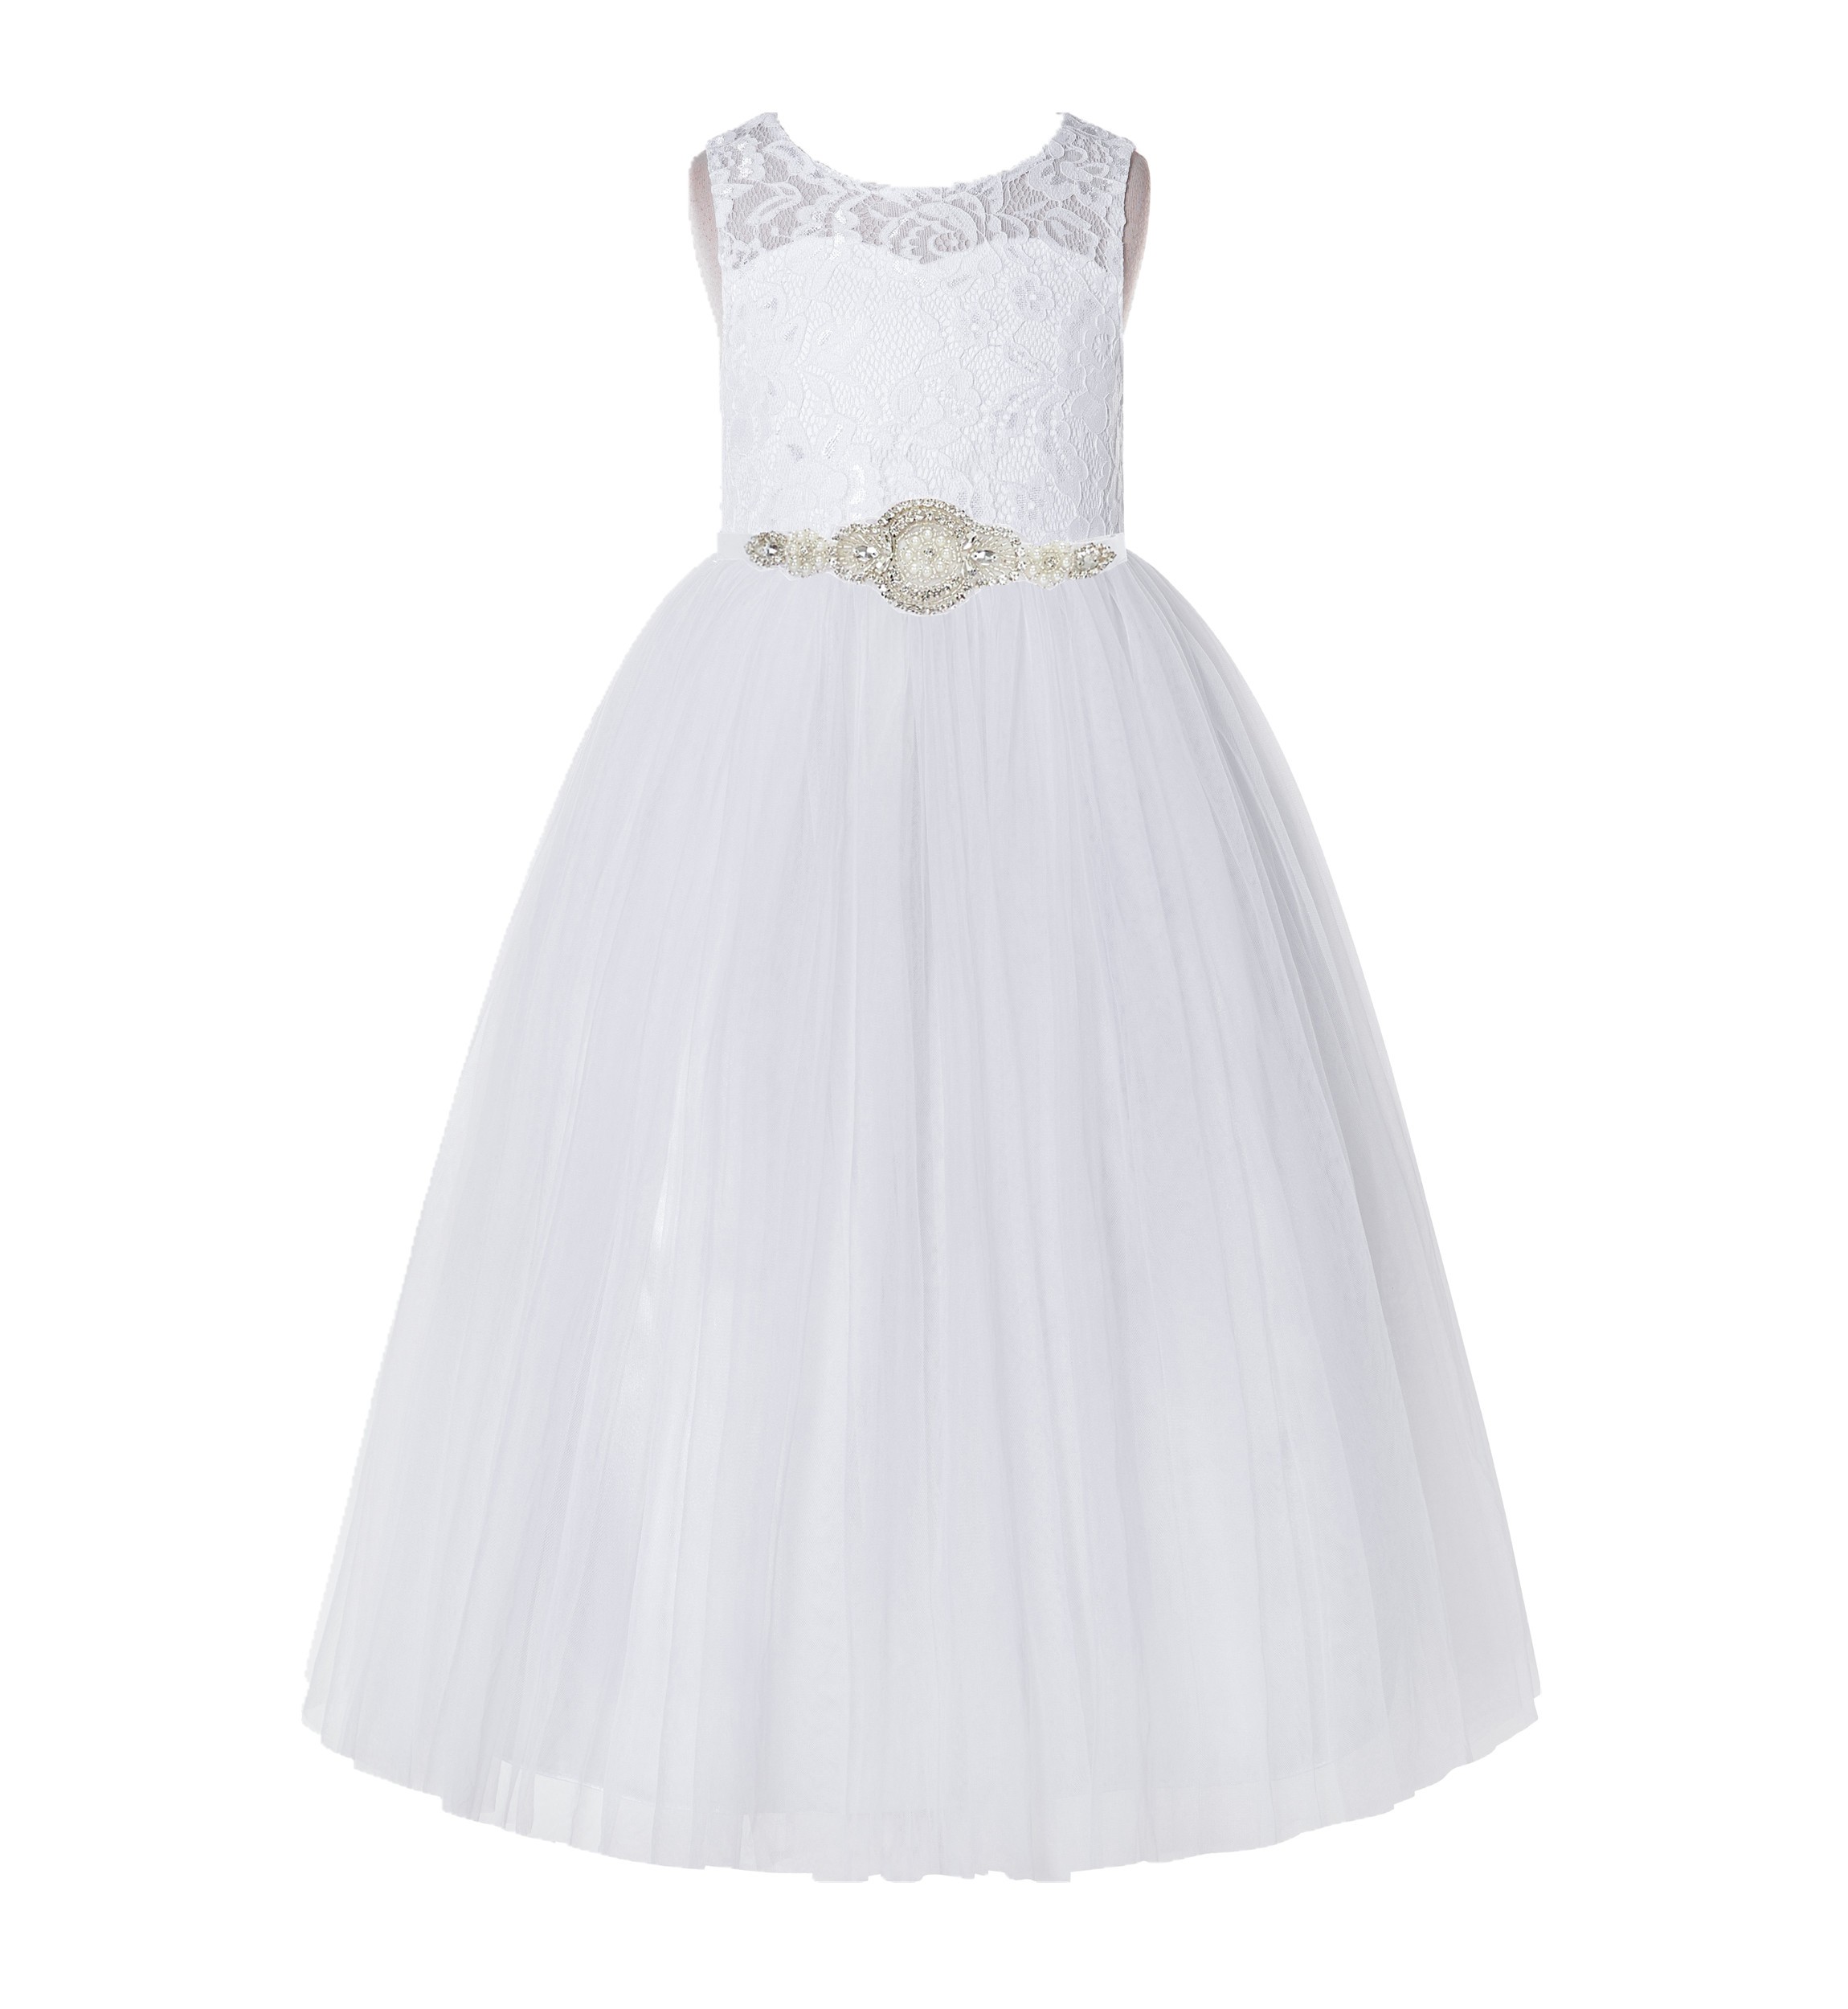 White A-Line Tulle Lace Flower Girl Dress 178R7